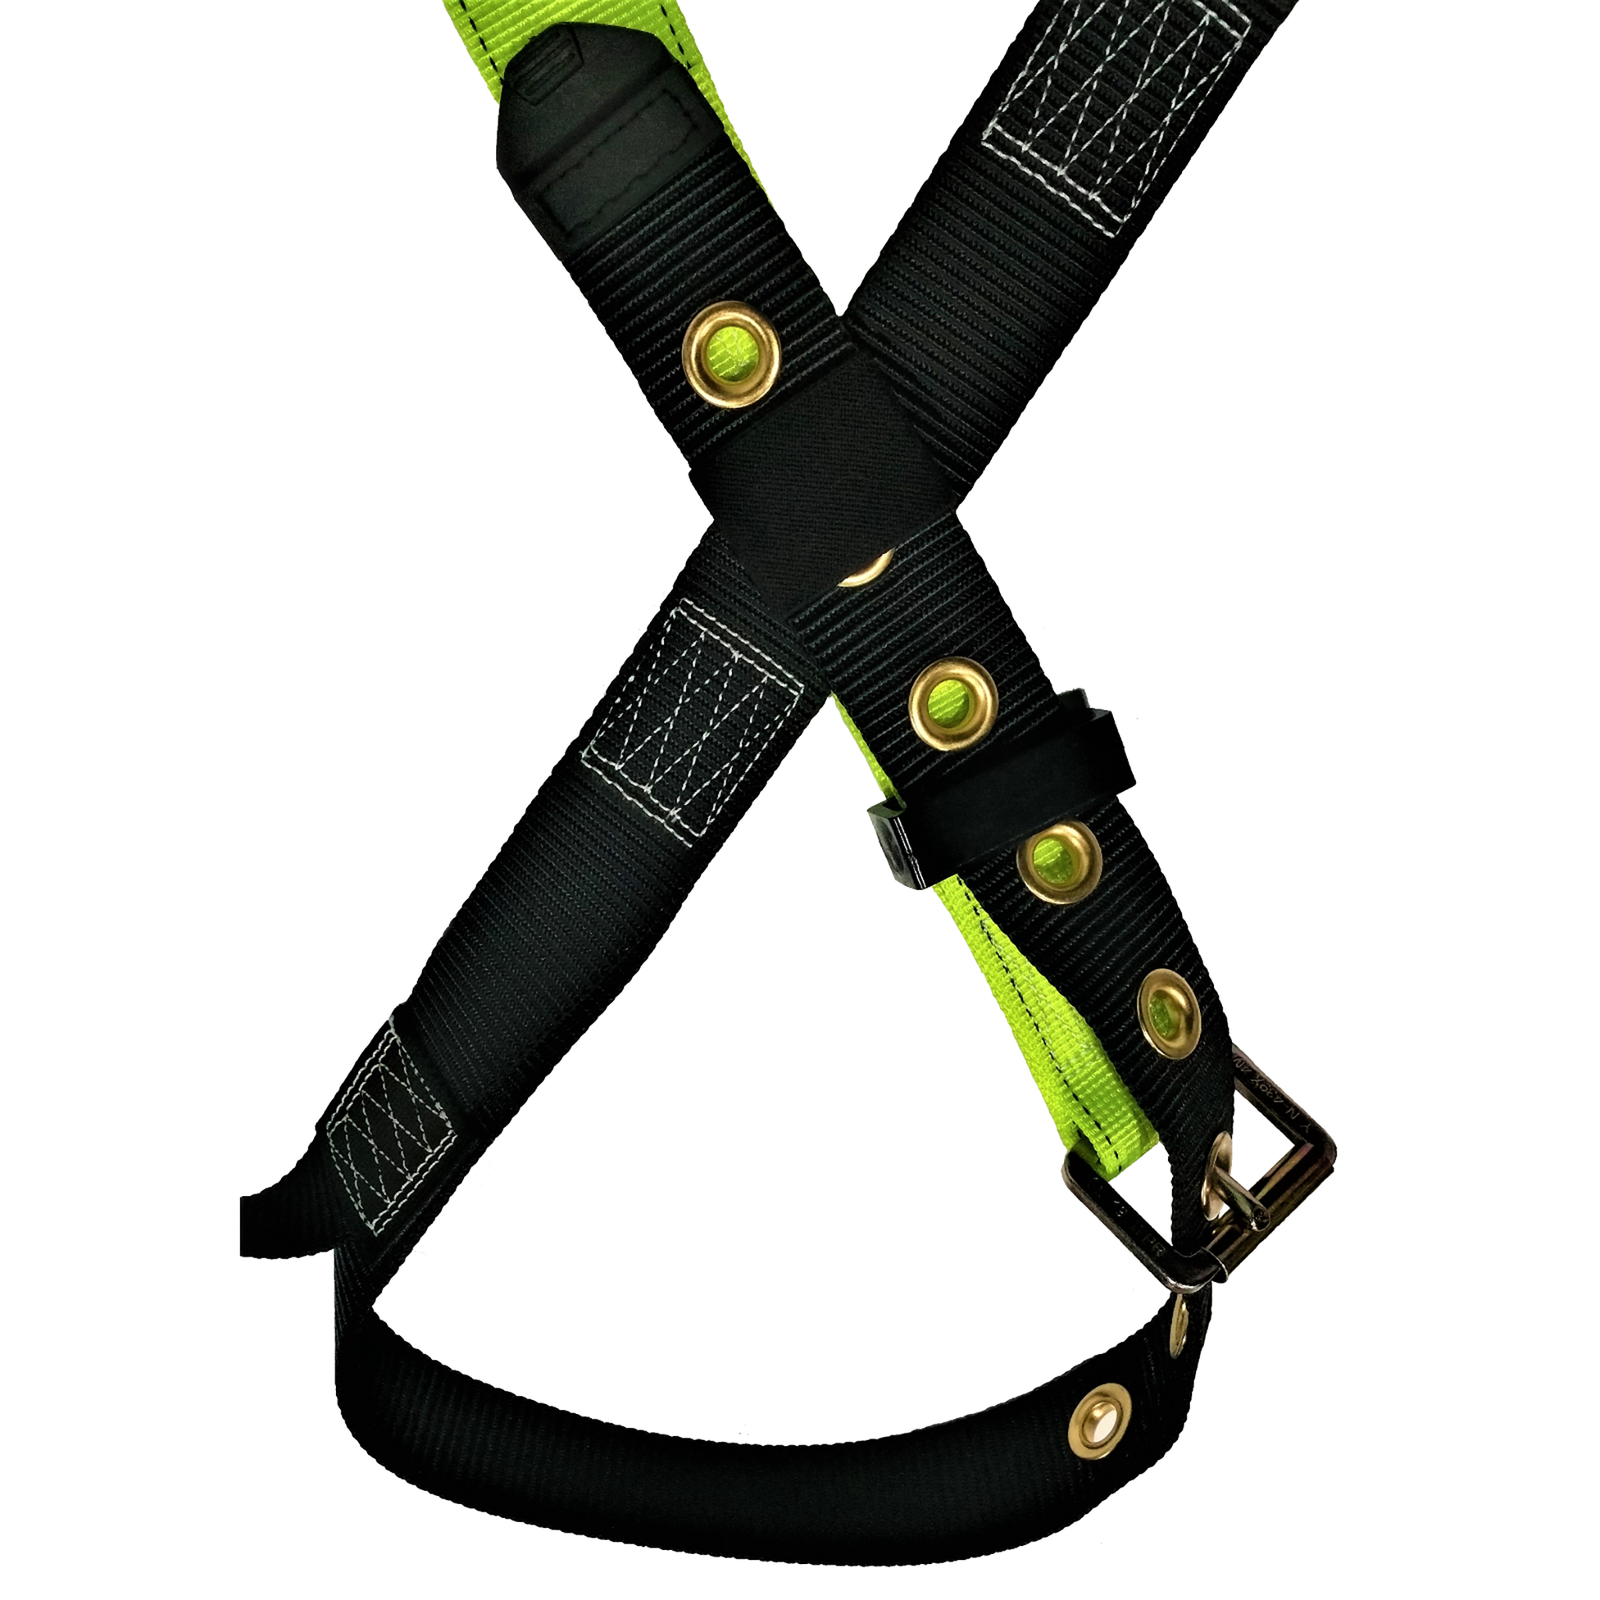 Pixnor 1D Ring Safety Harness High Climbing Safety Belt Anti Falling Protection Whole Body Electrical Work Safety Belt Altitude Operation Outdoor